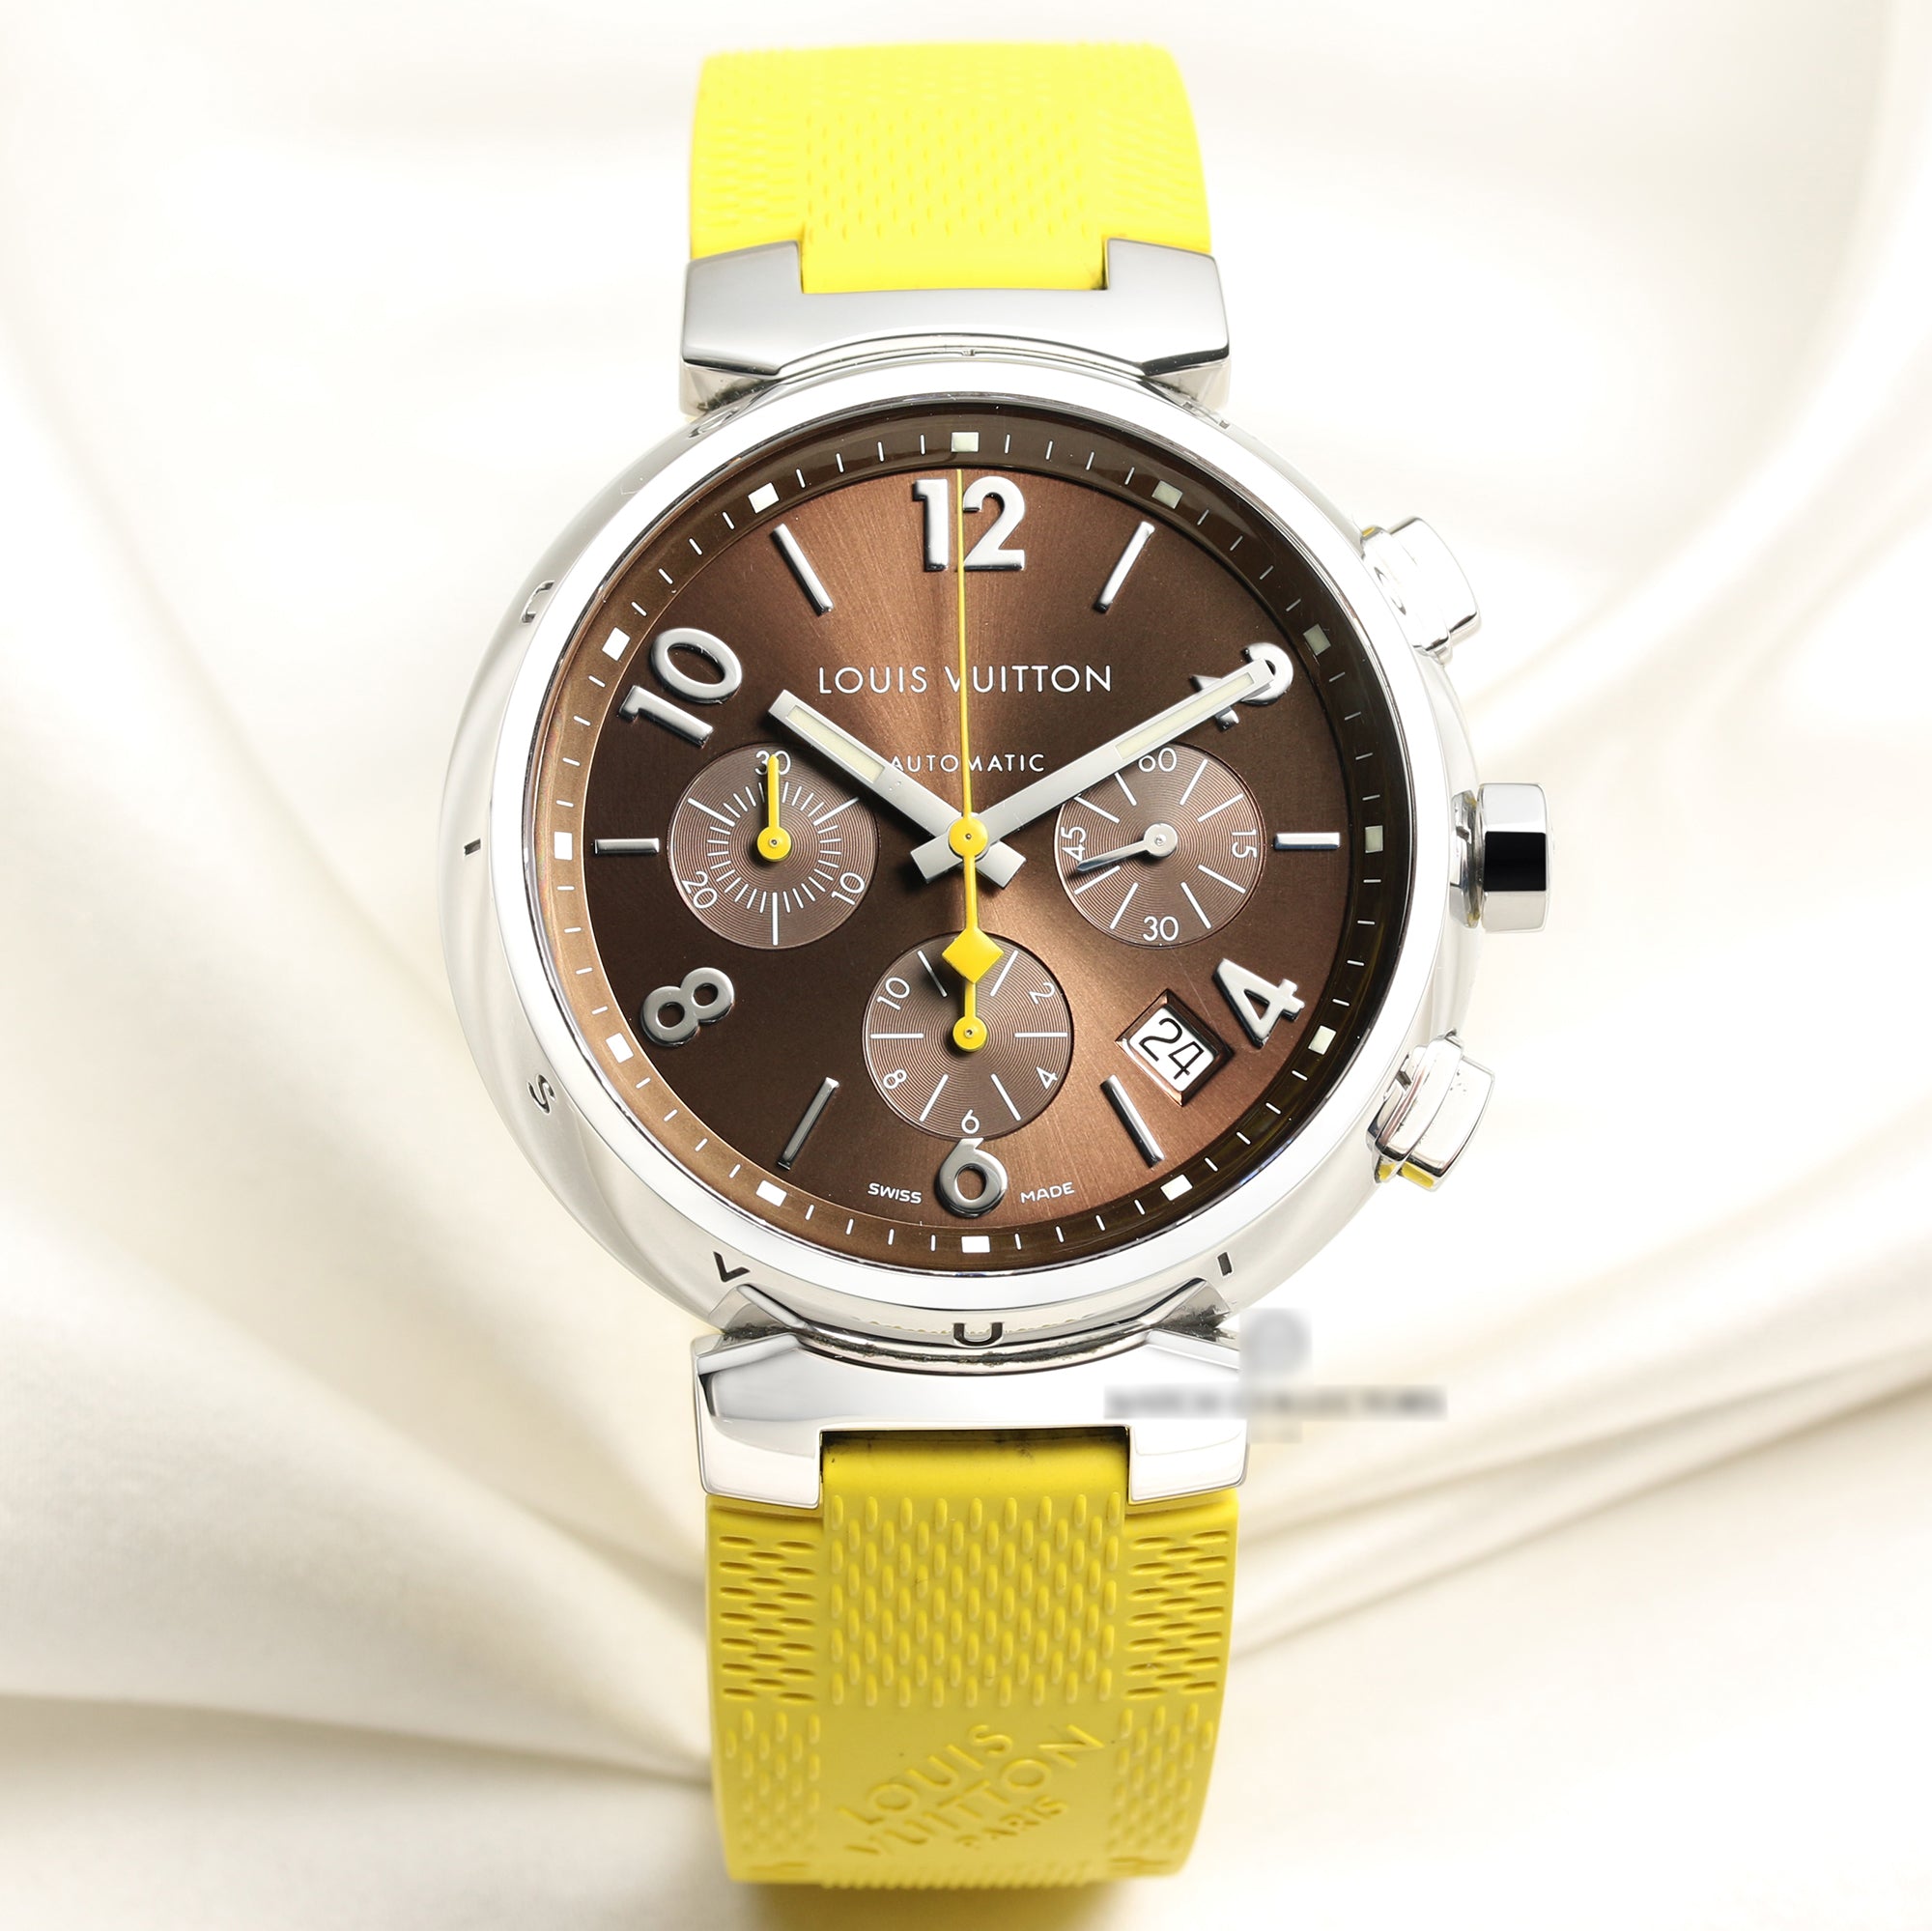 Louis Vuitton Tambour second hand prices